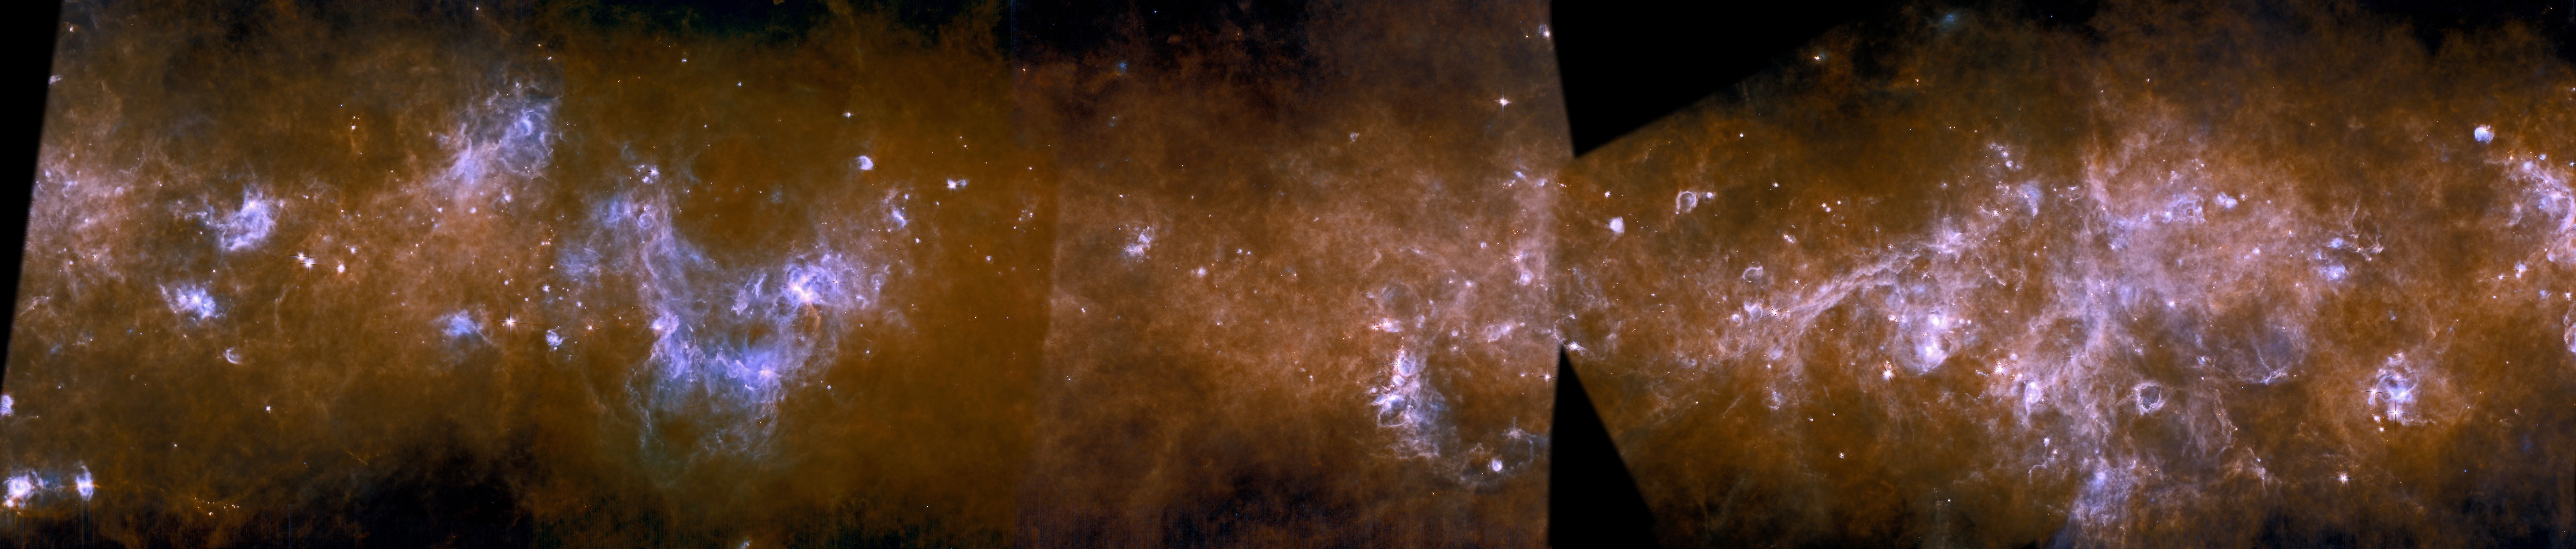 An illustrative example of a case where orientation constraints were essential. The Galactic Plane mapping programme -- HiGal -- required interlocking tiles around the full 360 degrees of the galactic Plane. This was achieved by setting an orientation contraint so that the 2x2 degree tiles would align horizontally. When the orientation constarint was relaxed slightly to ease scheduling problems, a tile would appear rotated; this was the case for the fourth tile in this strip of the Milky Way from Galactic Longitude 319 to 310 degrees from Centaurus to Crux.